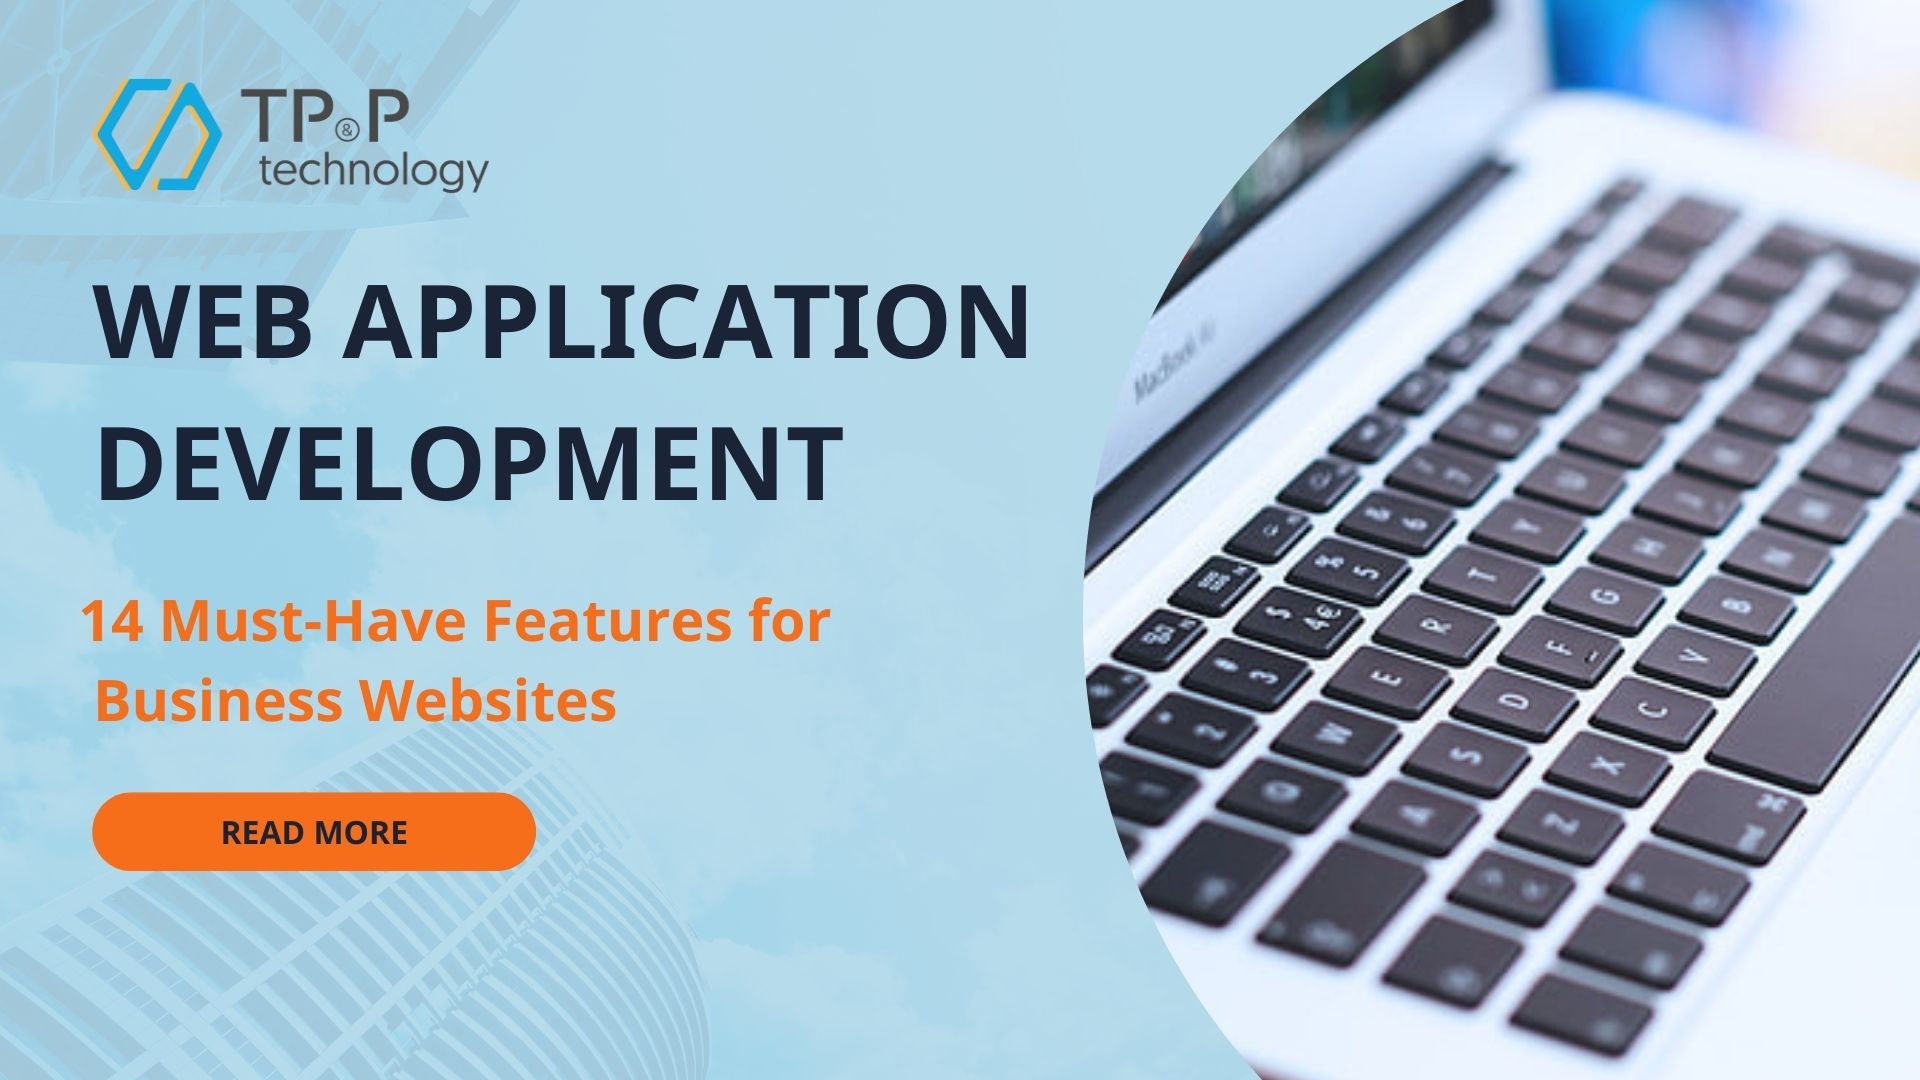 Website Application Development: 14 Must-Have Features for Business Websites